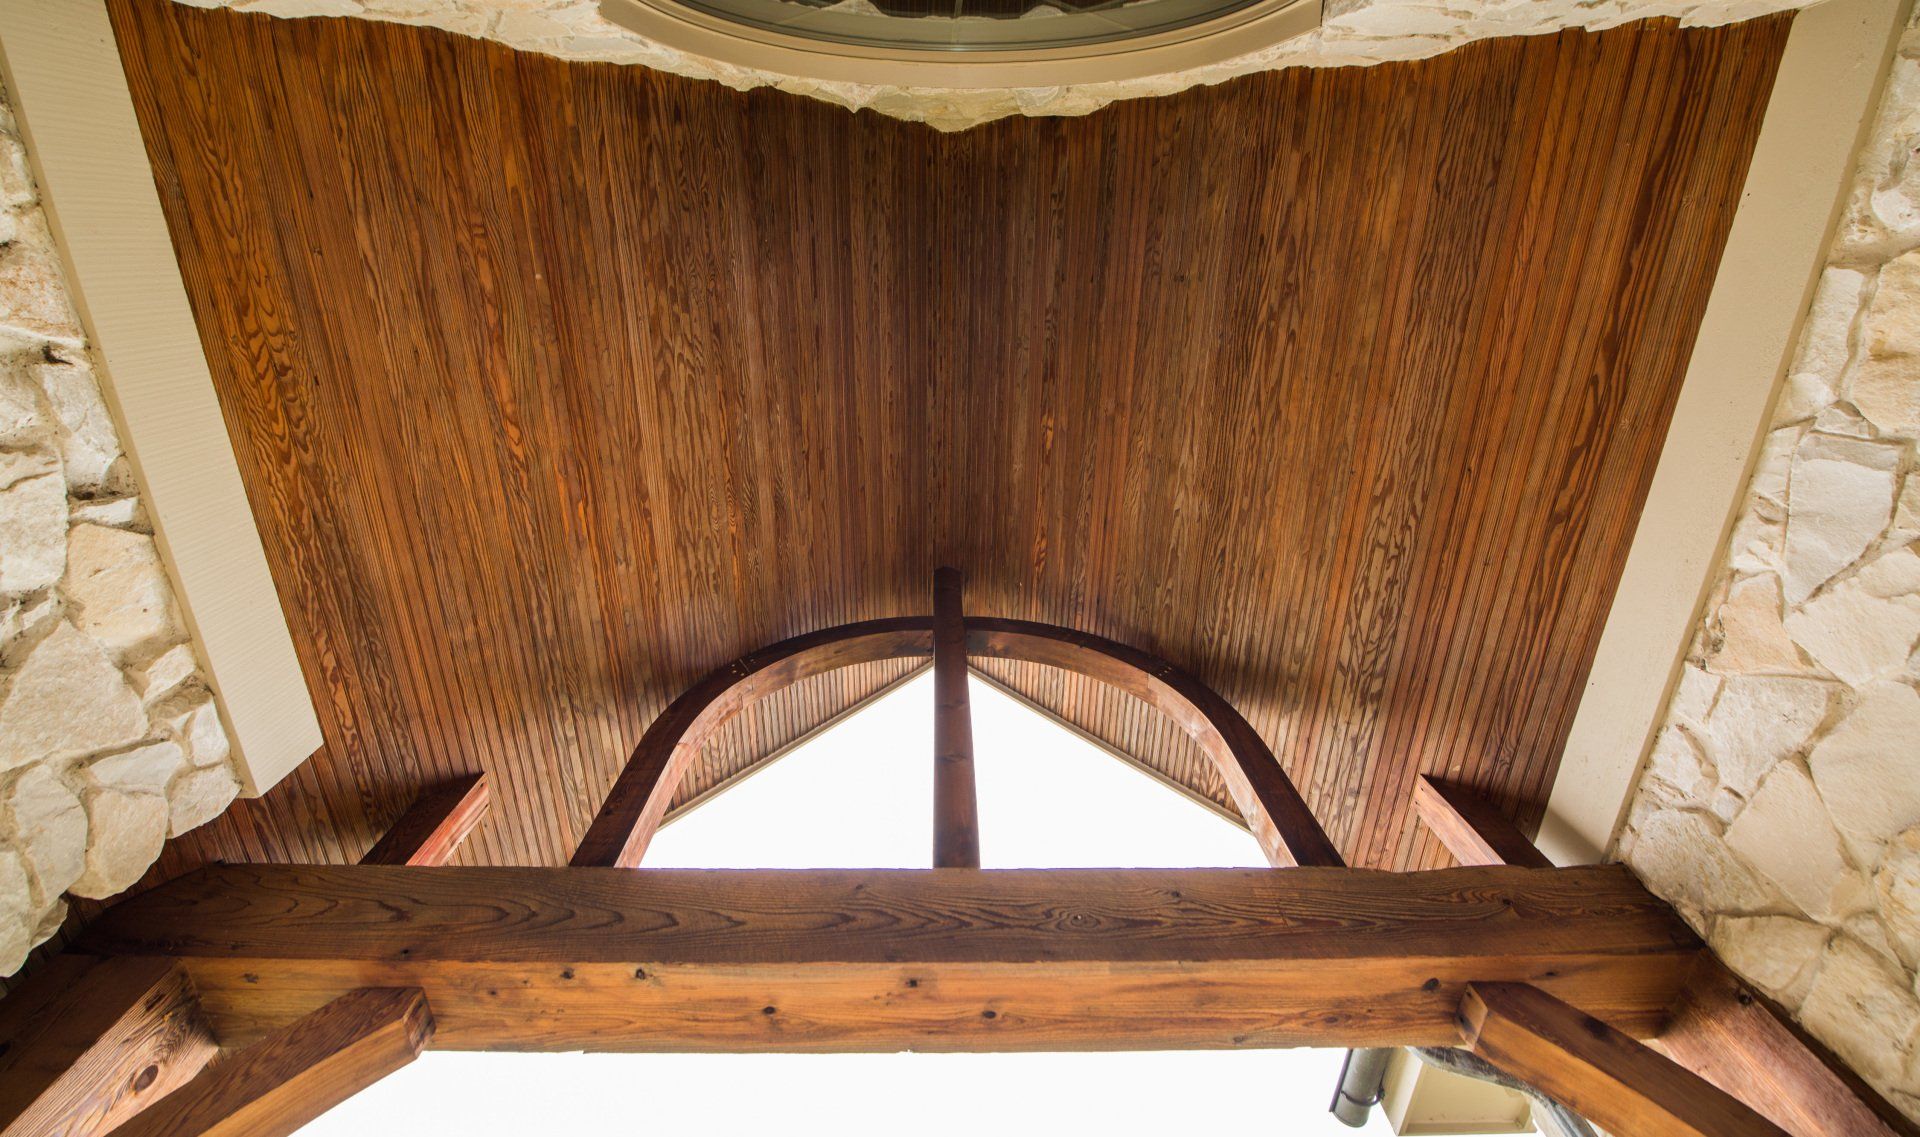 looking up at the ceiling of a building with wooden beams and a window .